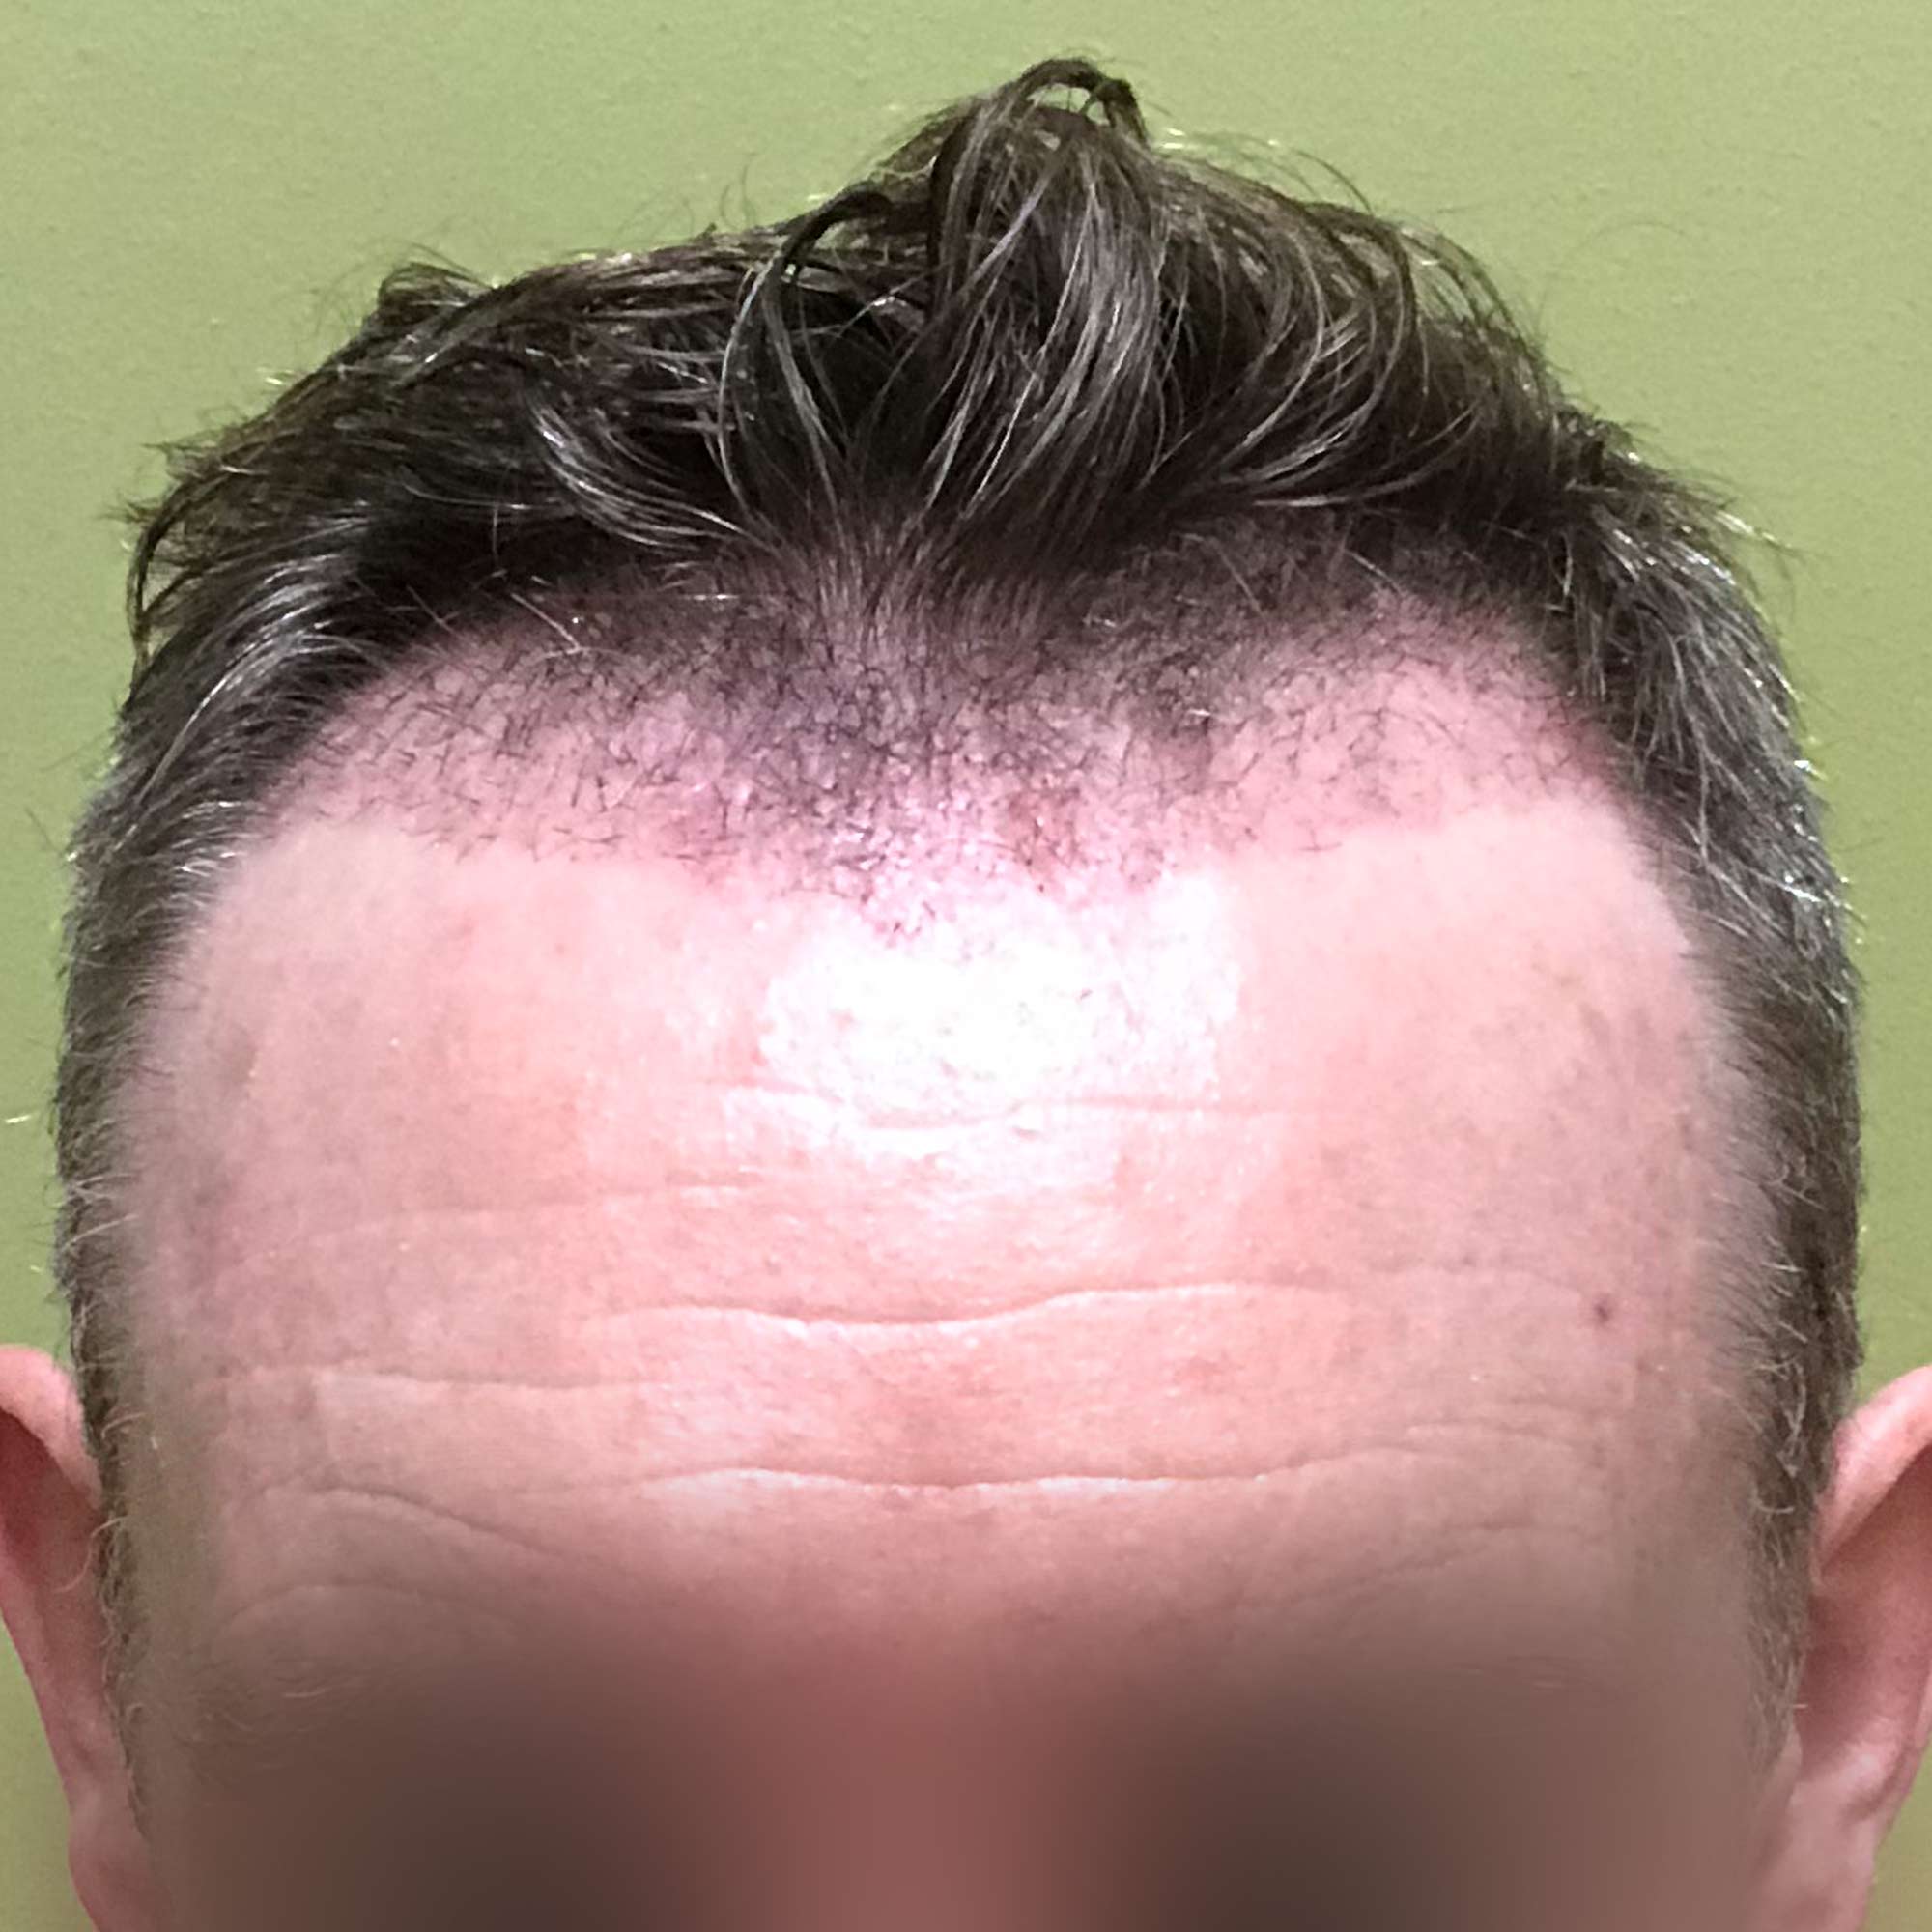 FUE Hair Transplant Timeline | Amazing Results At Only 6 Months!